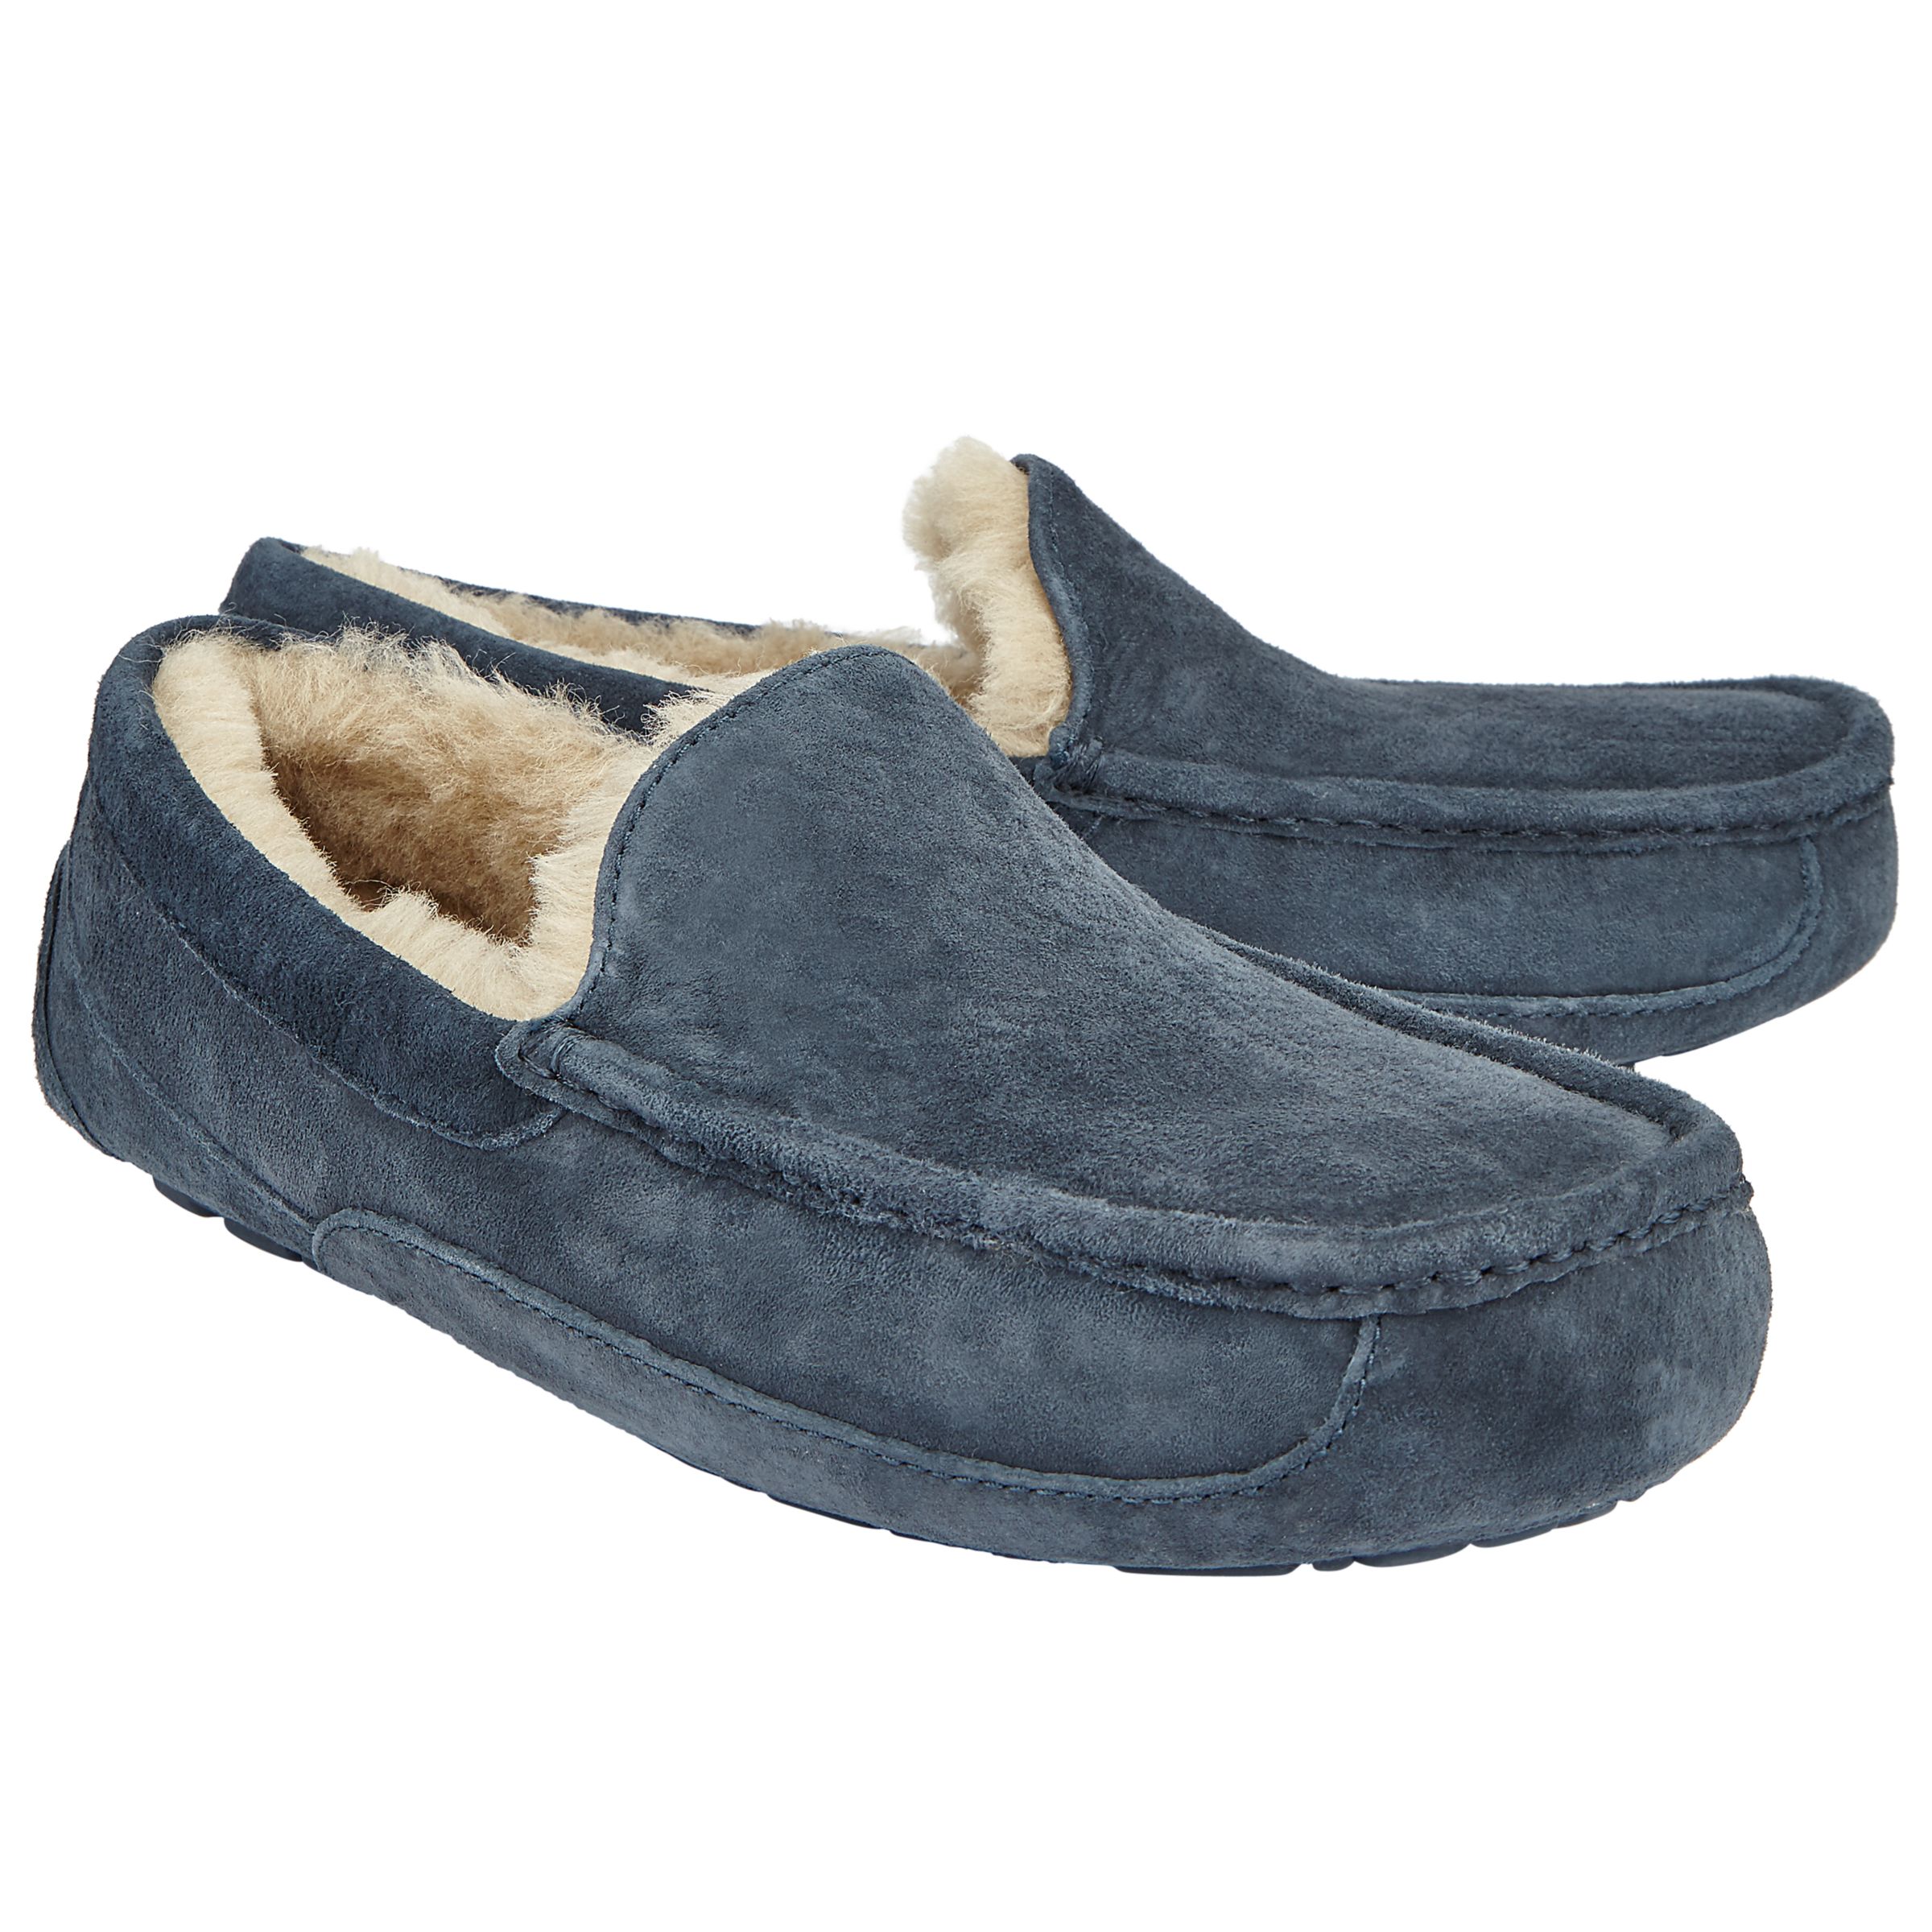 UGG Ascot Moccasin Suede Slippers, Navy 